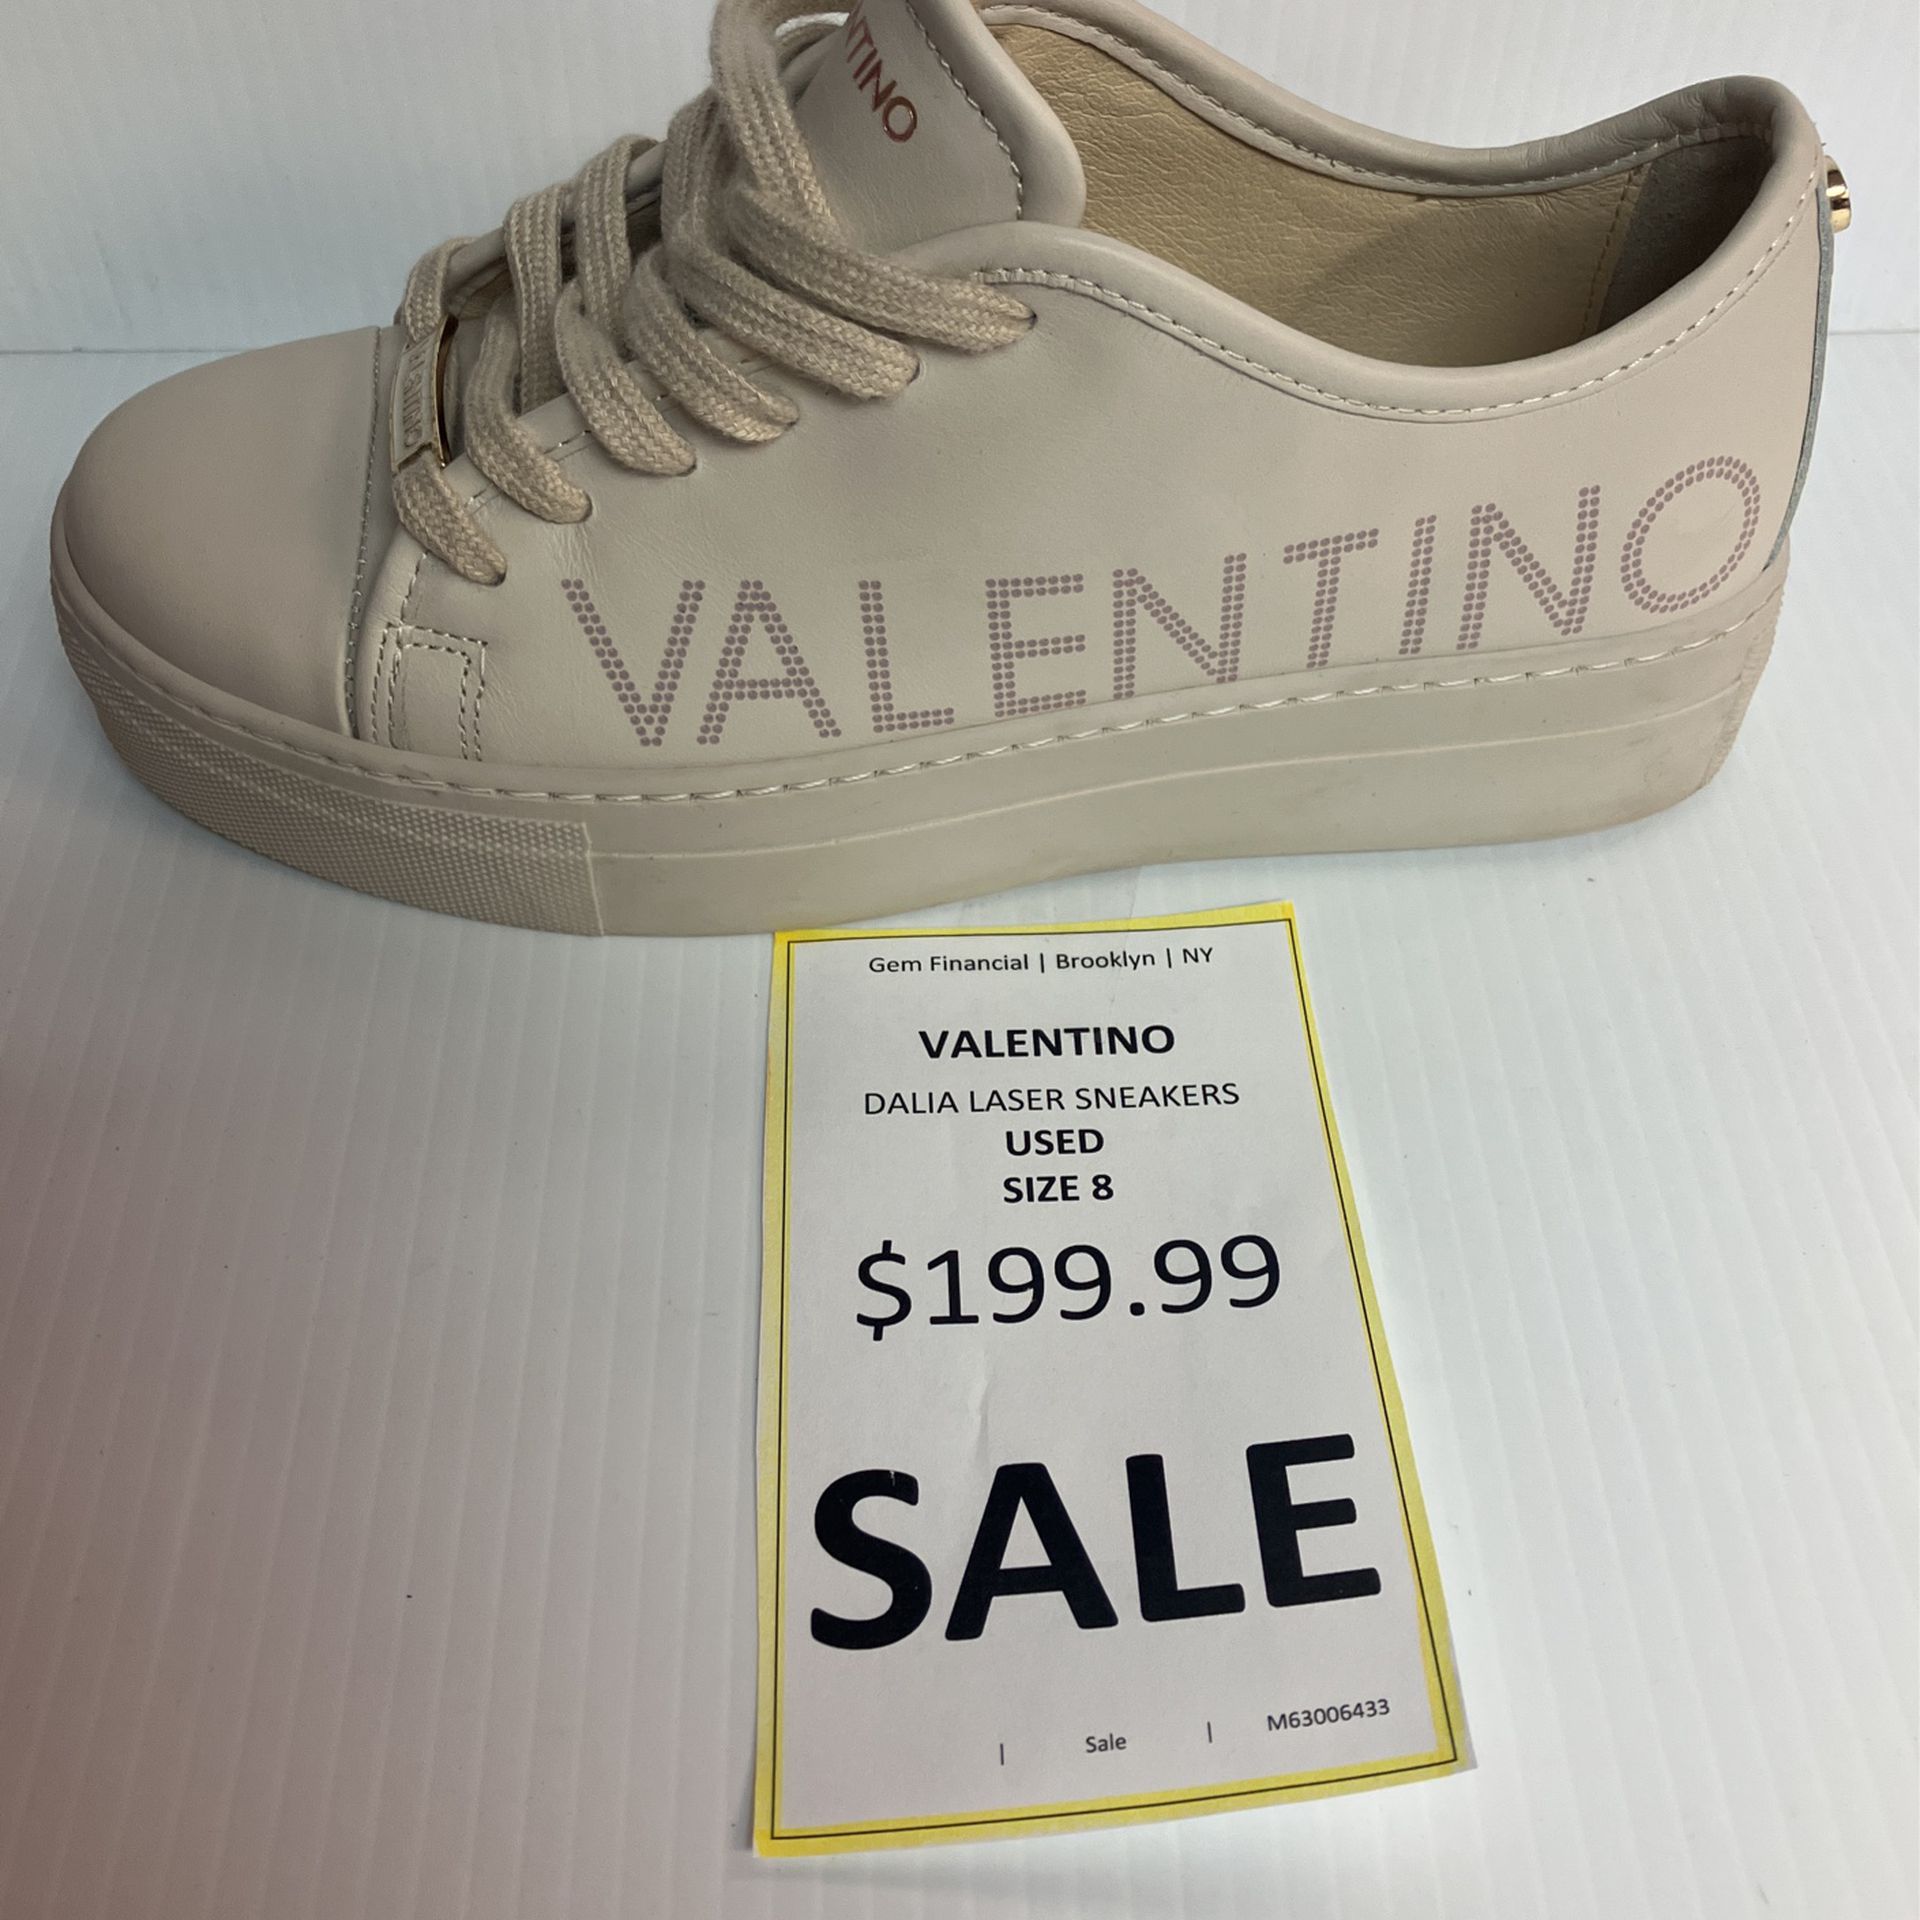 Valentino Dalia Laser Sneakers for in South Hempstead, NY - OfferUp